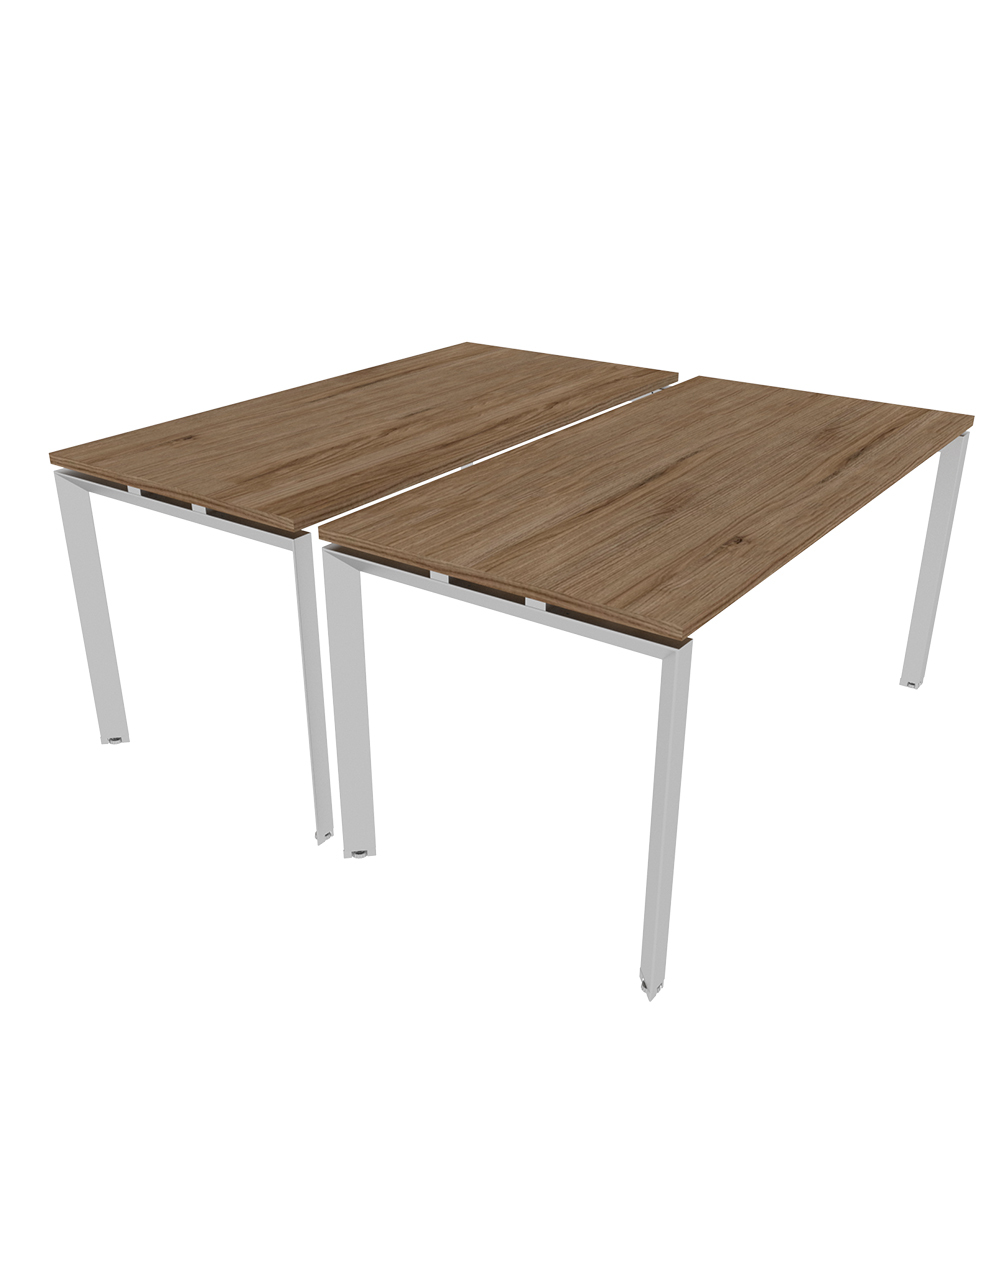 2 Inspire Office Tables